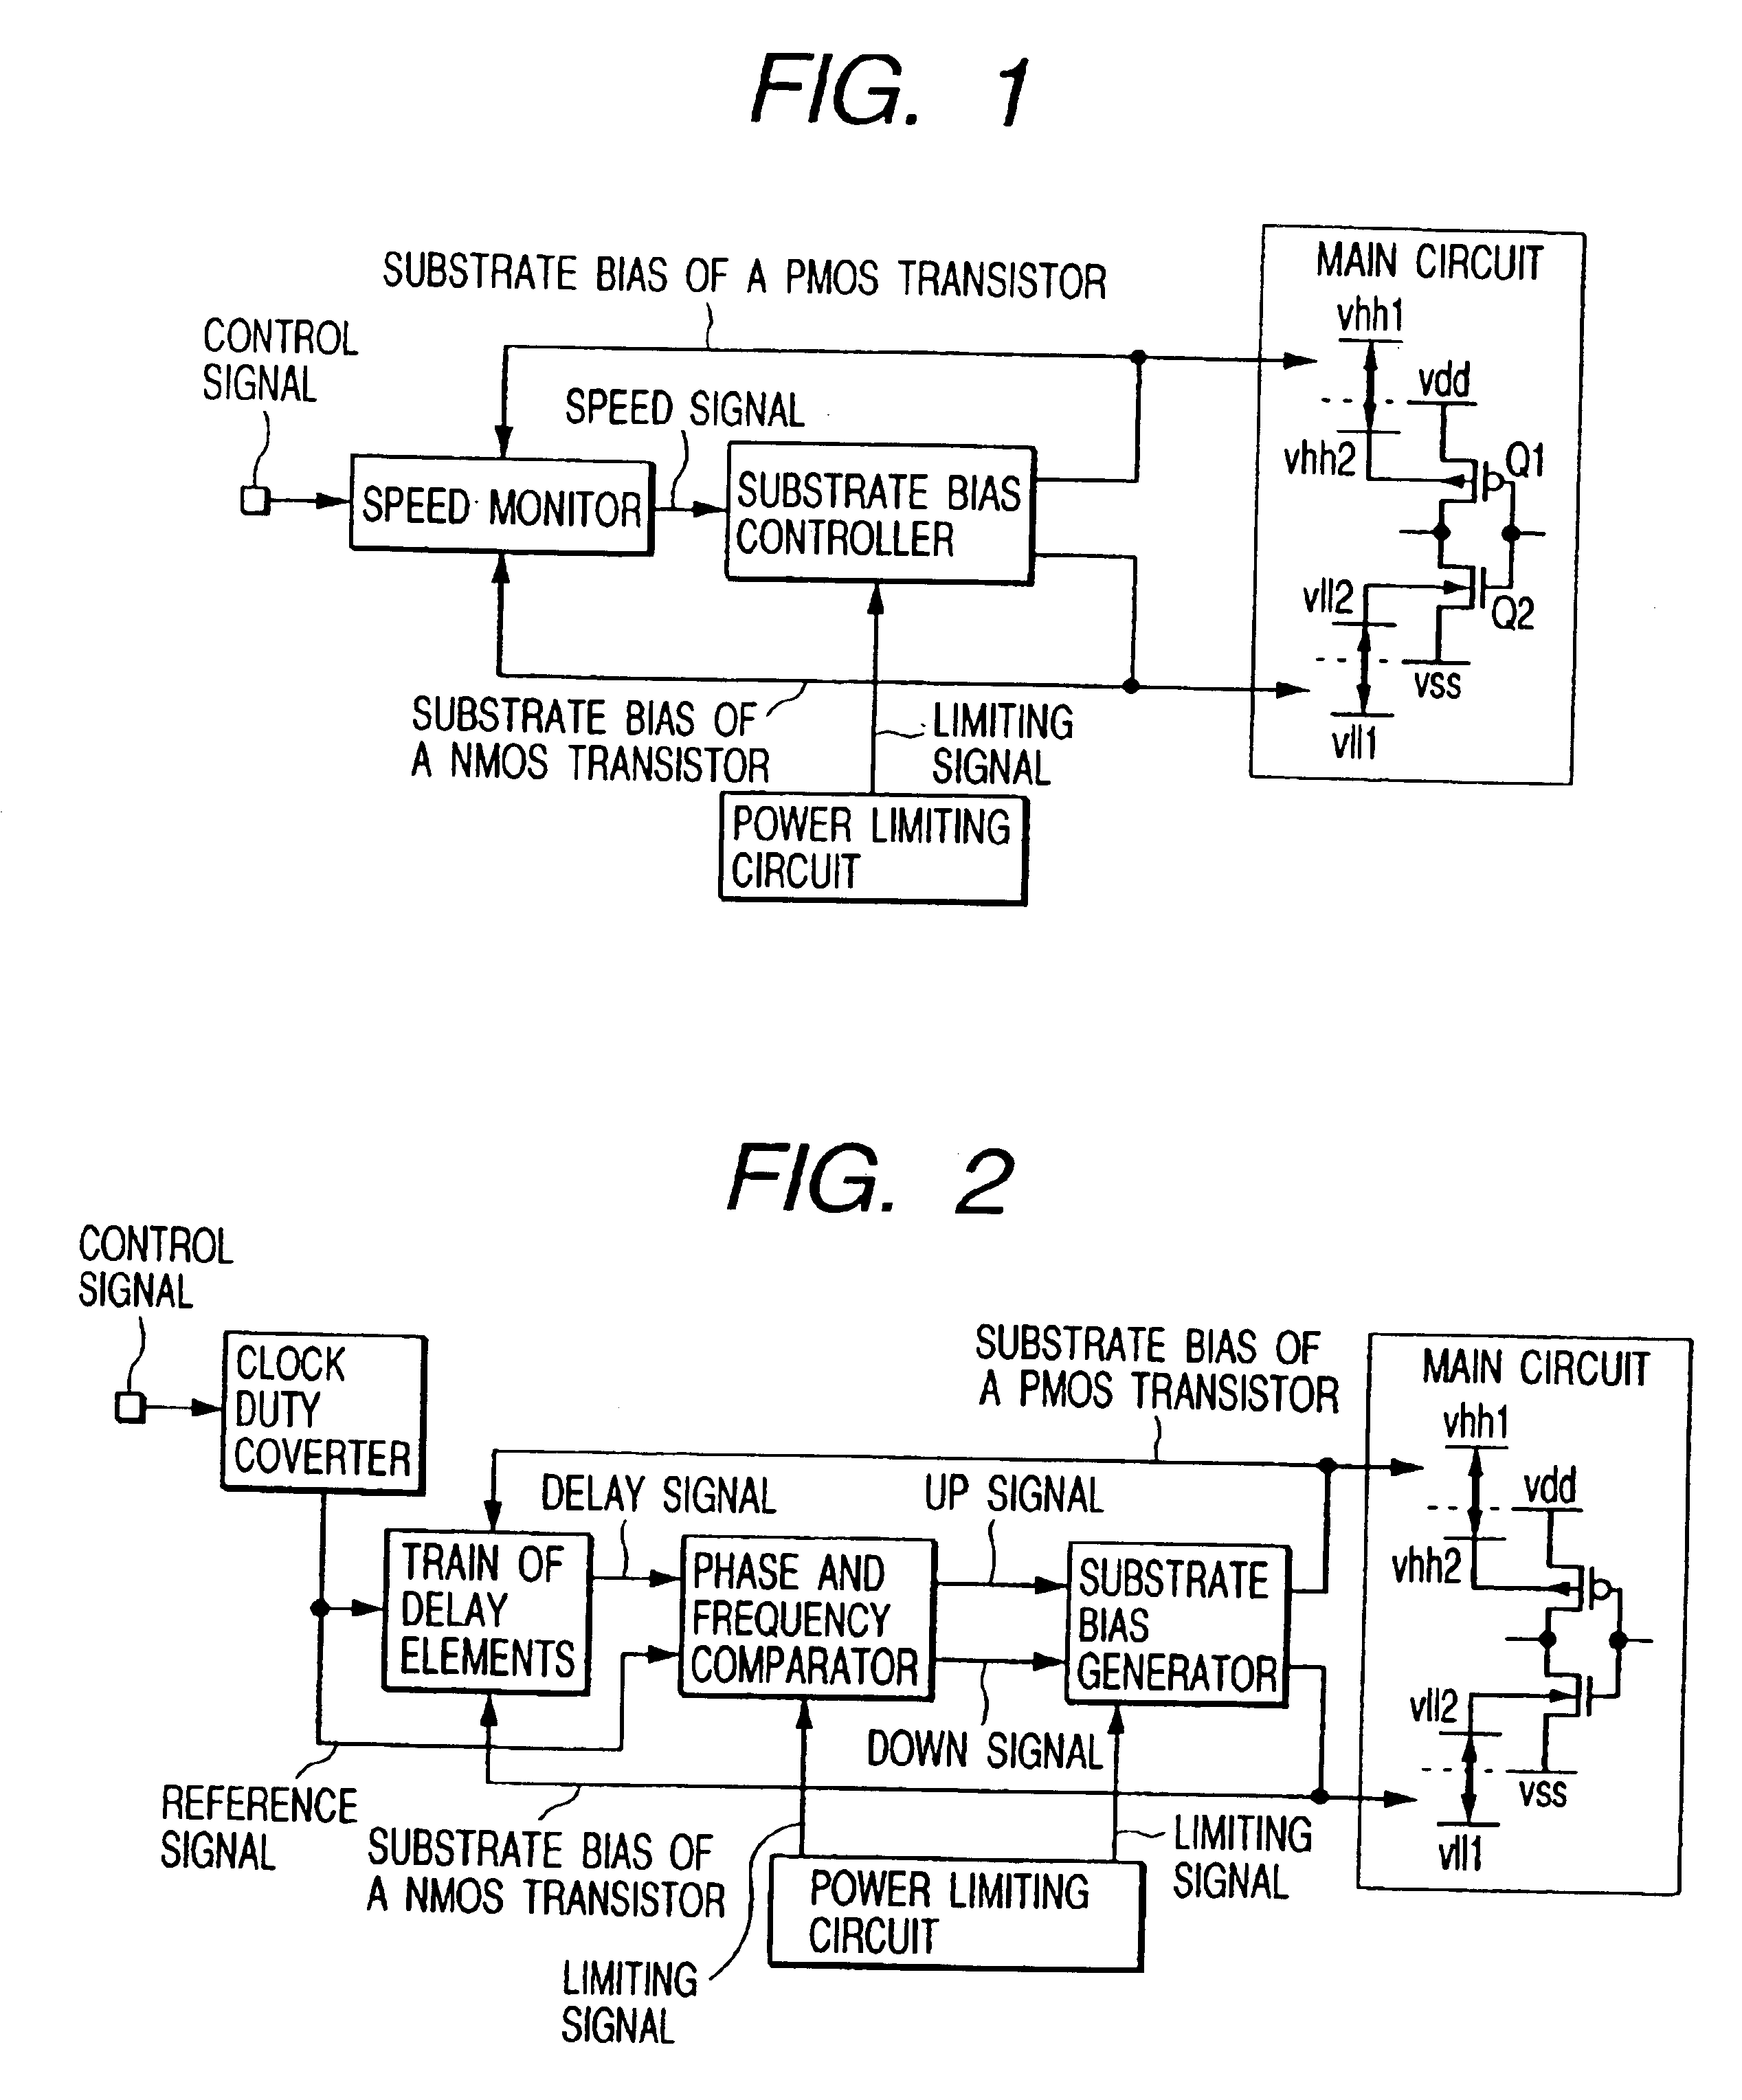 Semiconductor integrated circuit device including a substrate bias controller and a current limiting circuit